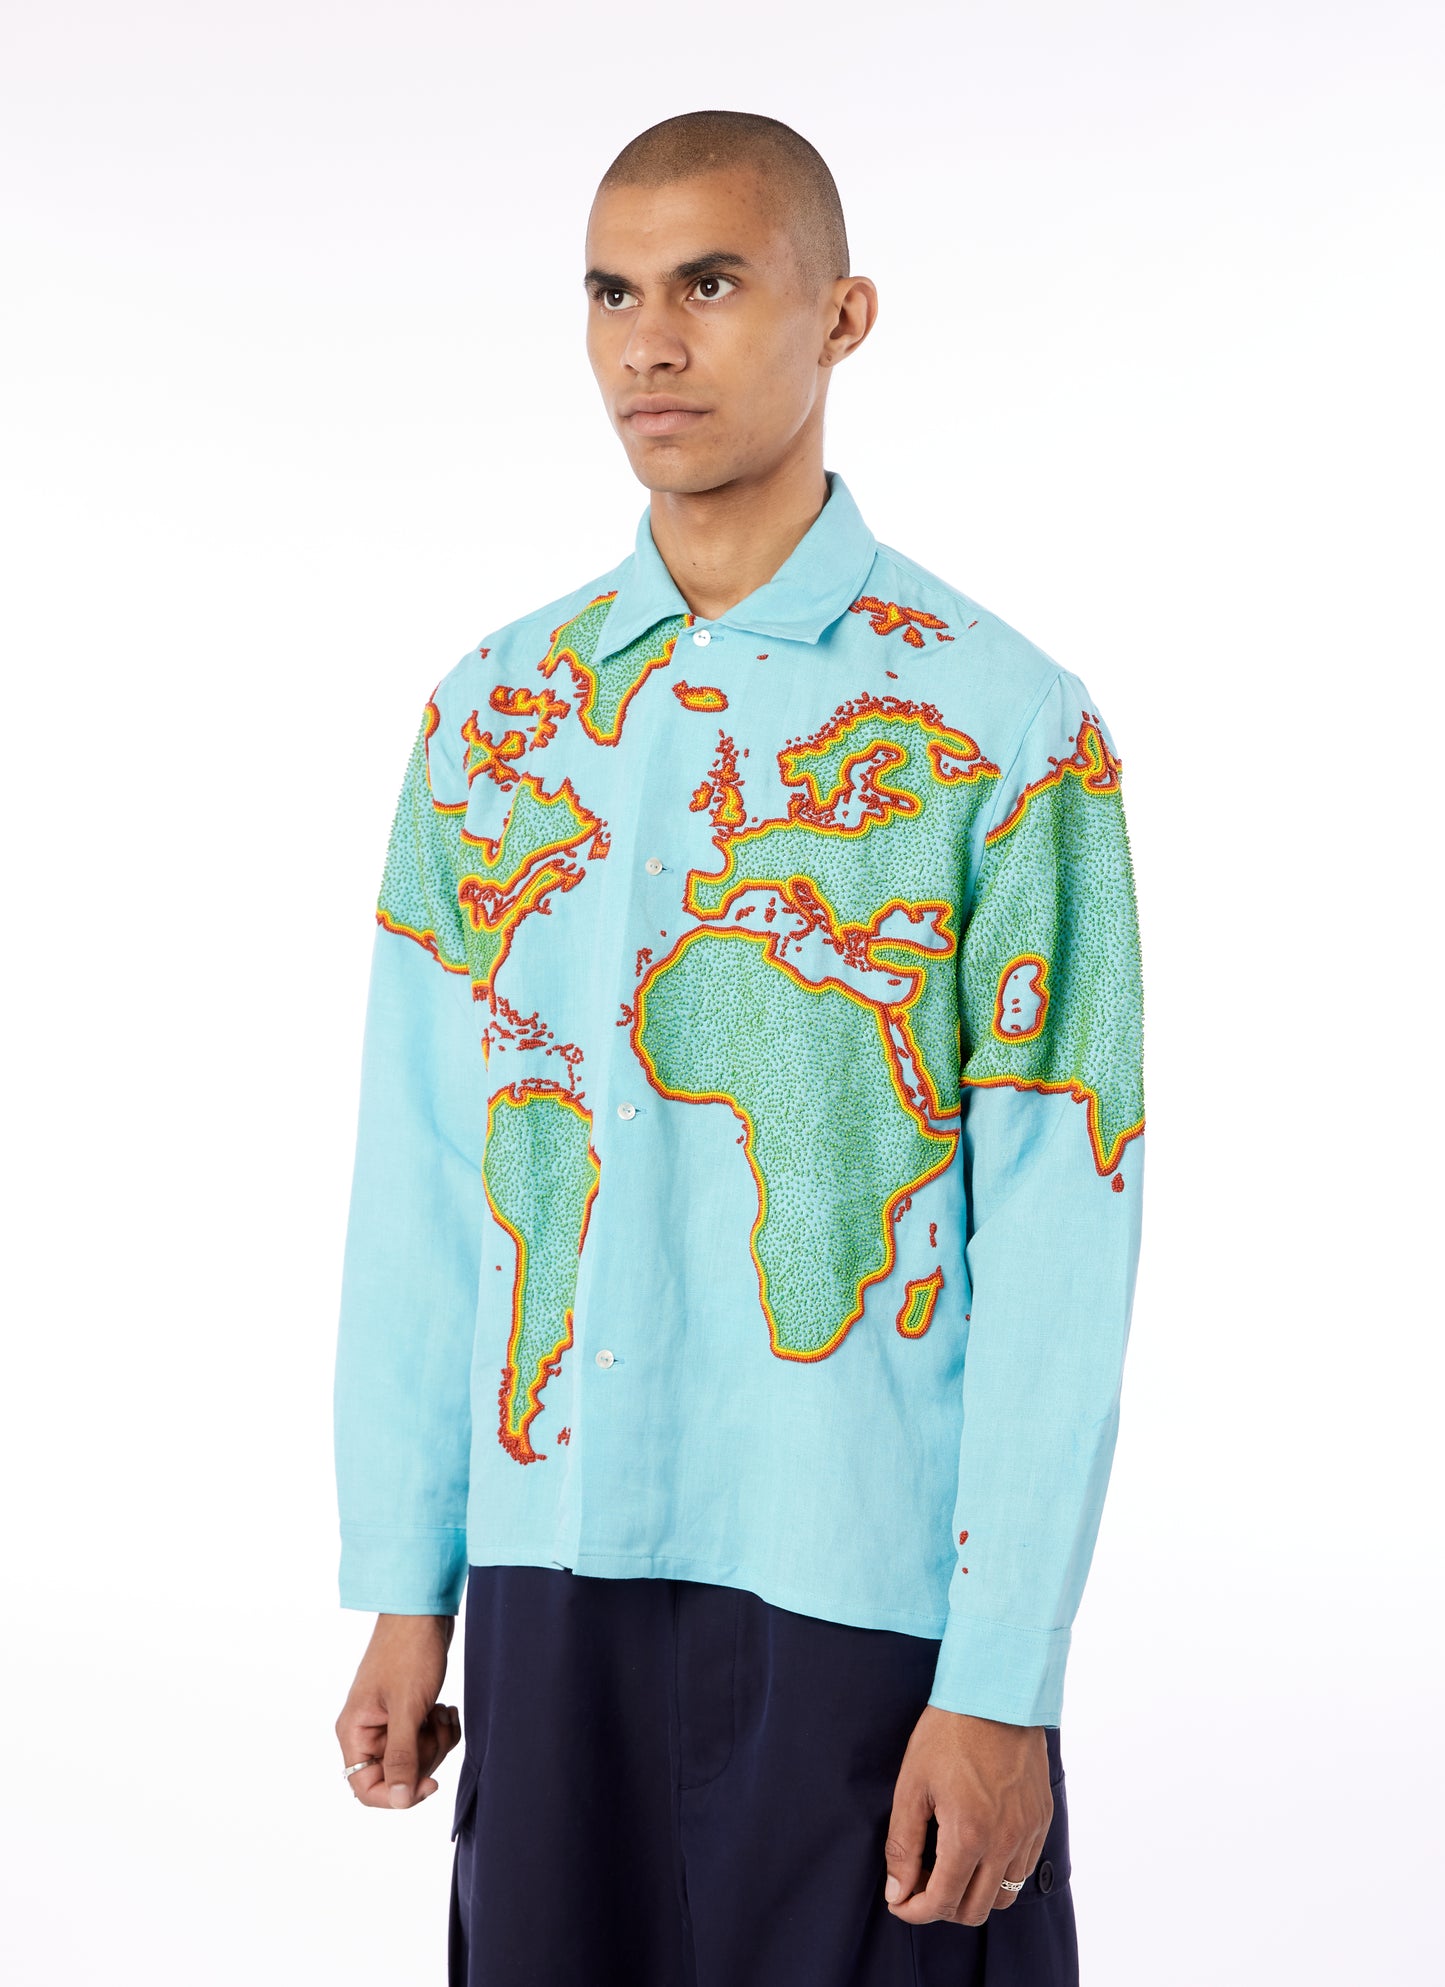 WORLD MAP EMBROIDERED SHIRT